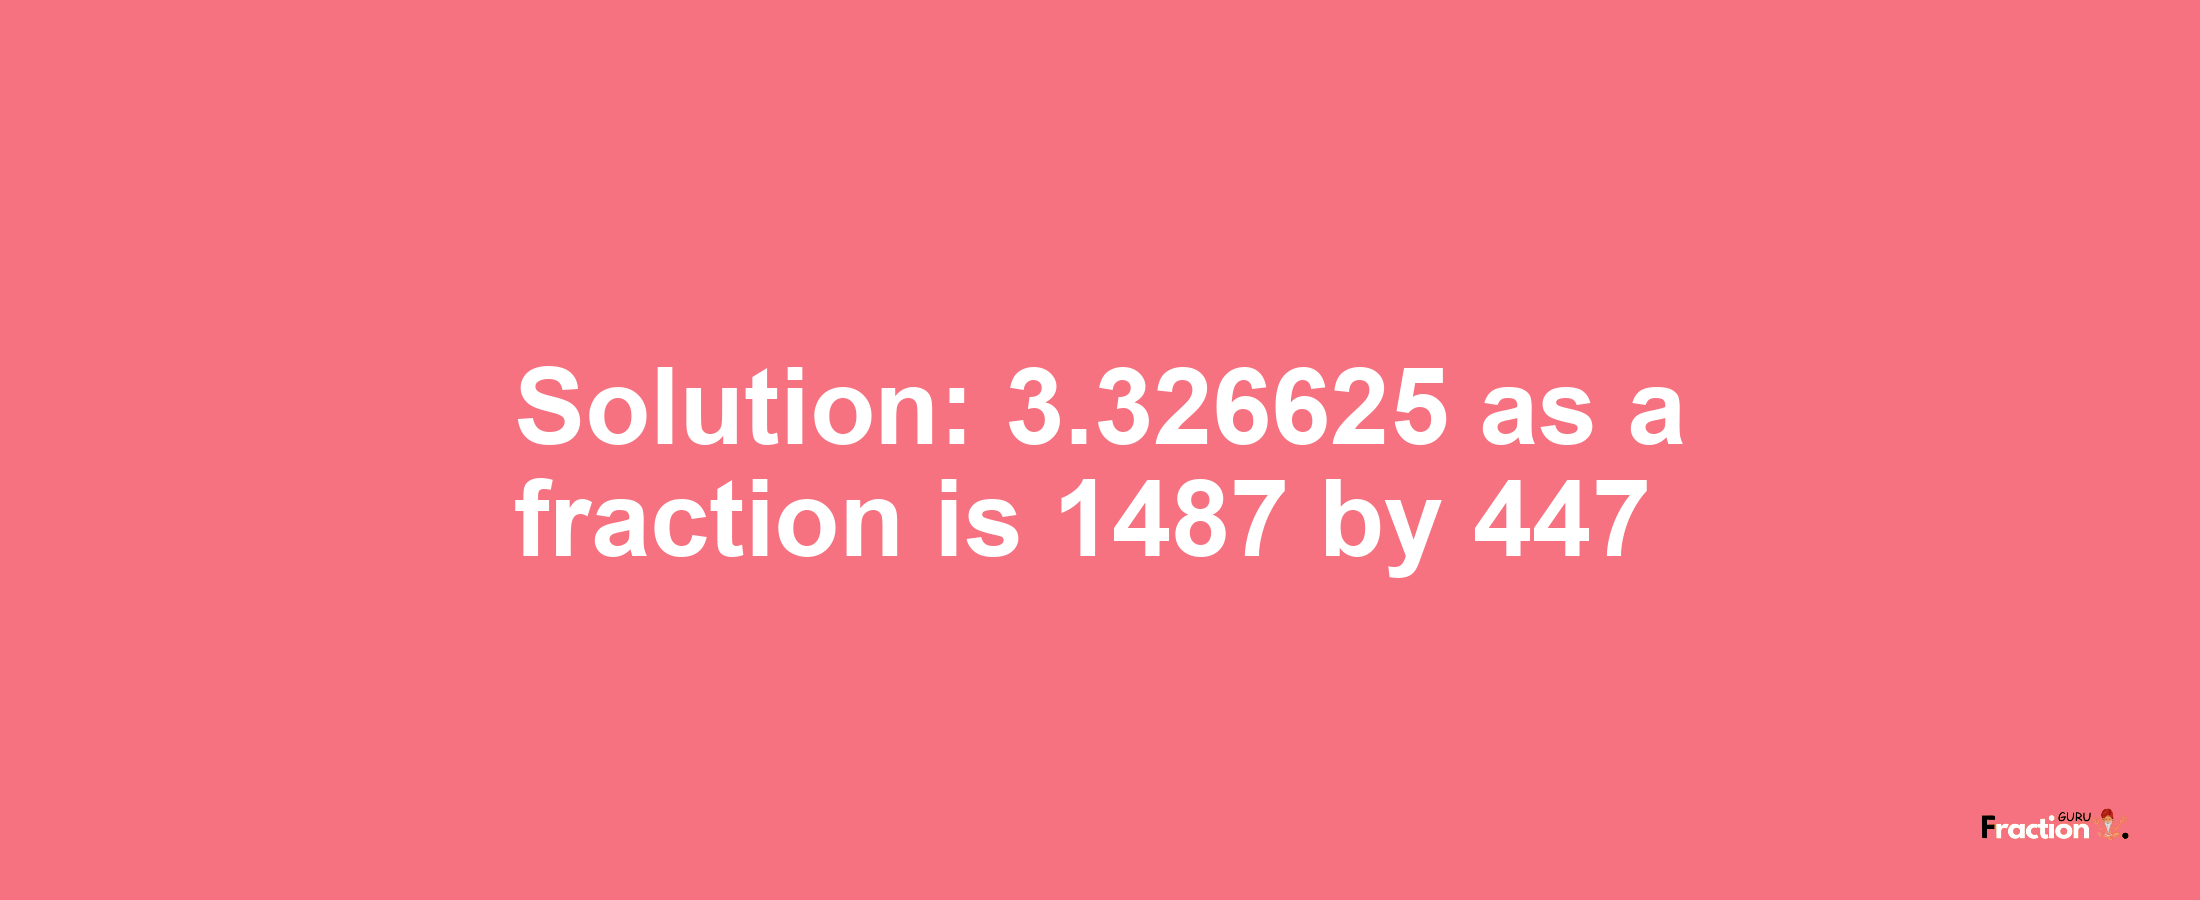 Solution:3.326625 as a fraction is 1487/447